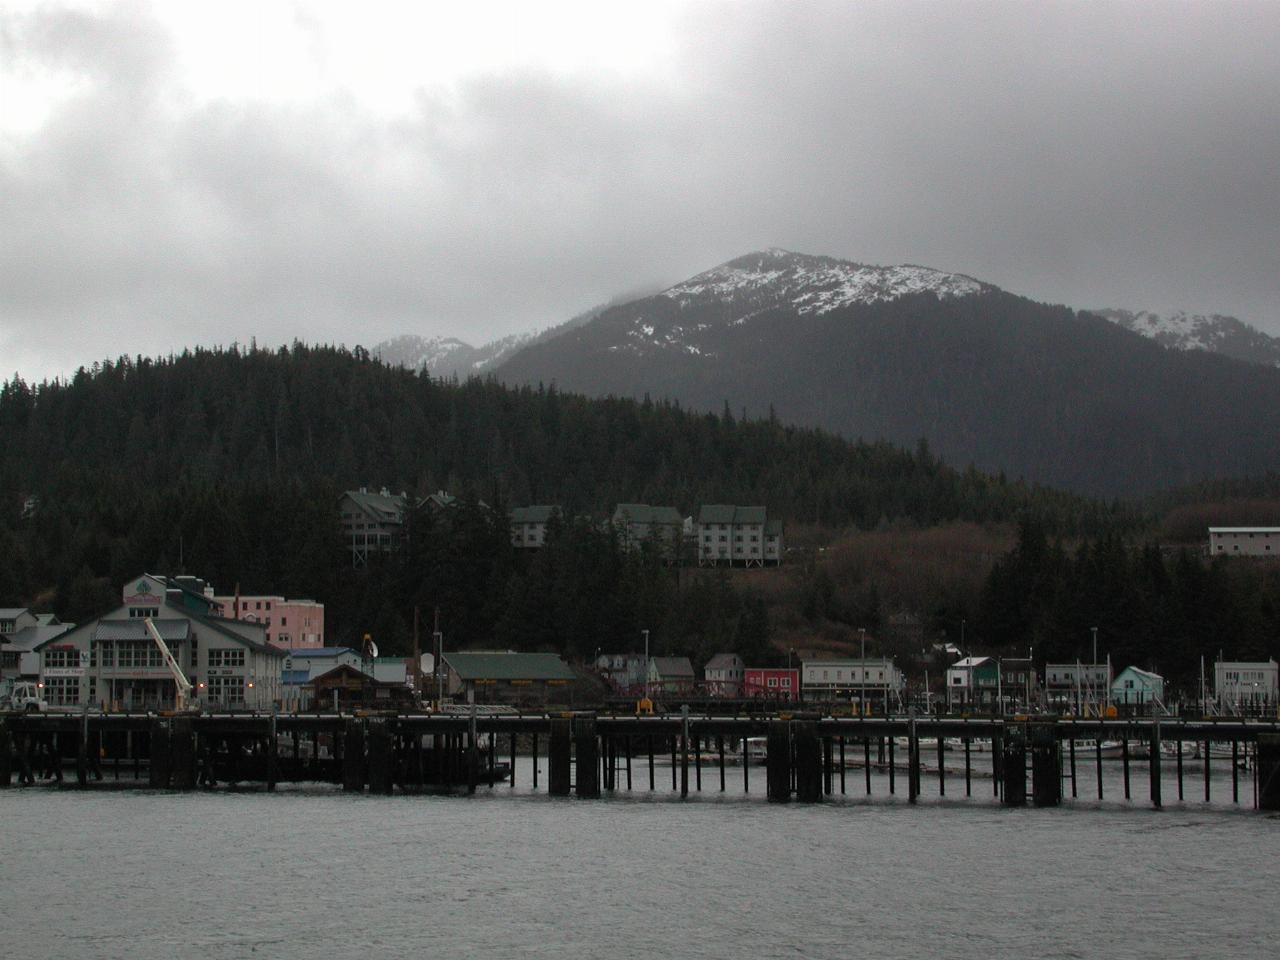 Departing Ketchikan, showing Cape Fox Hotel (centre of image)